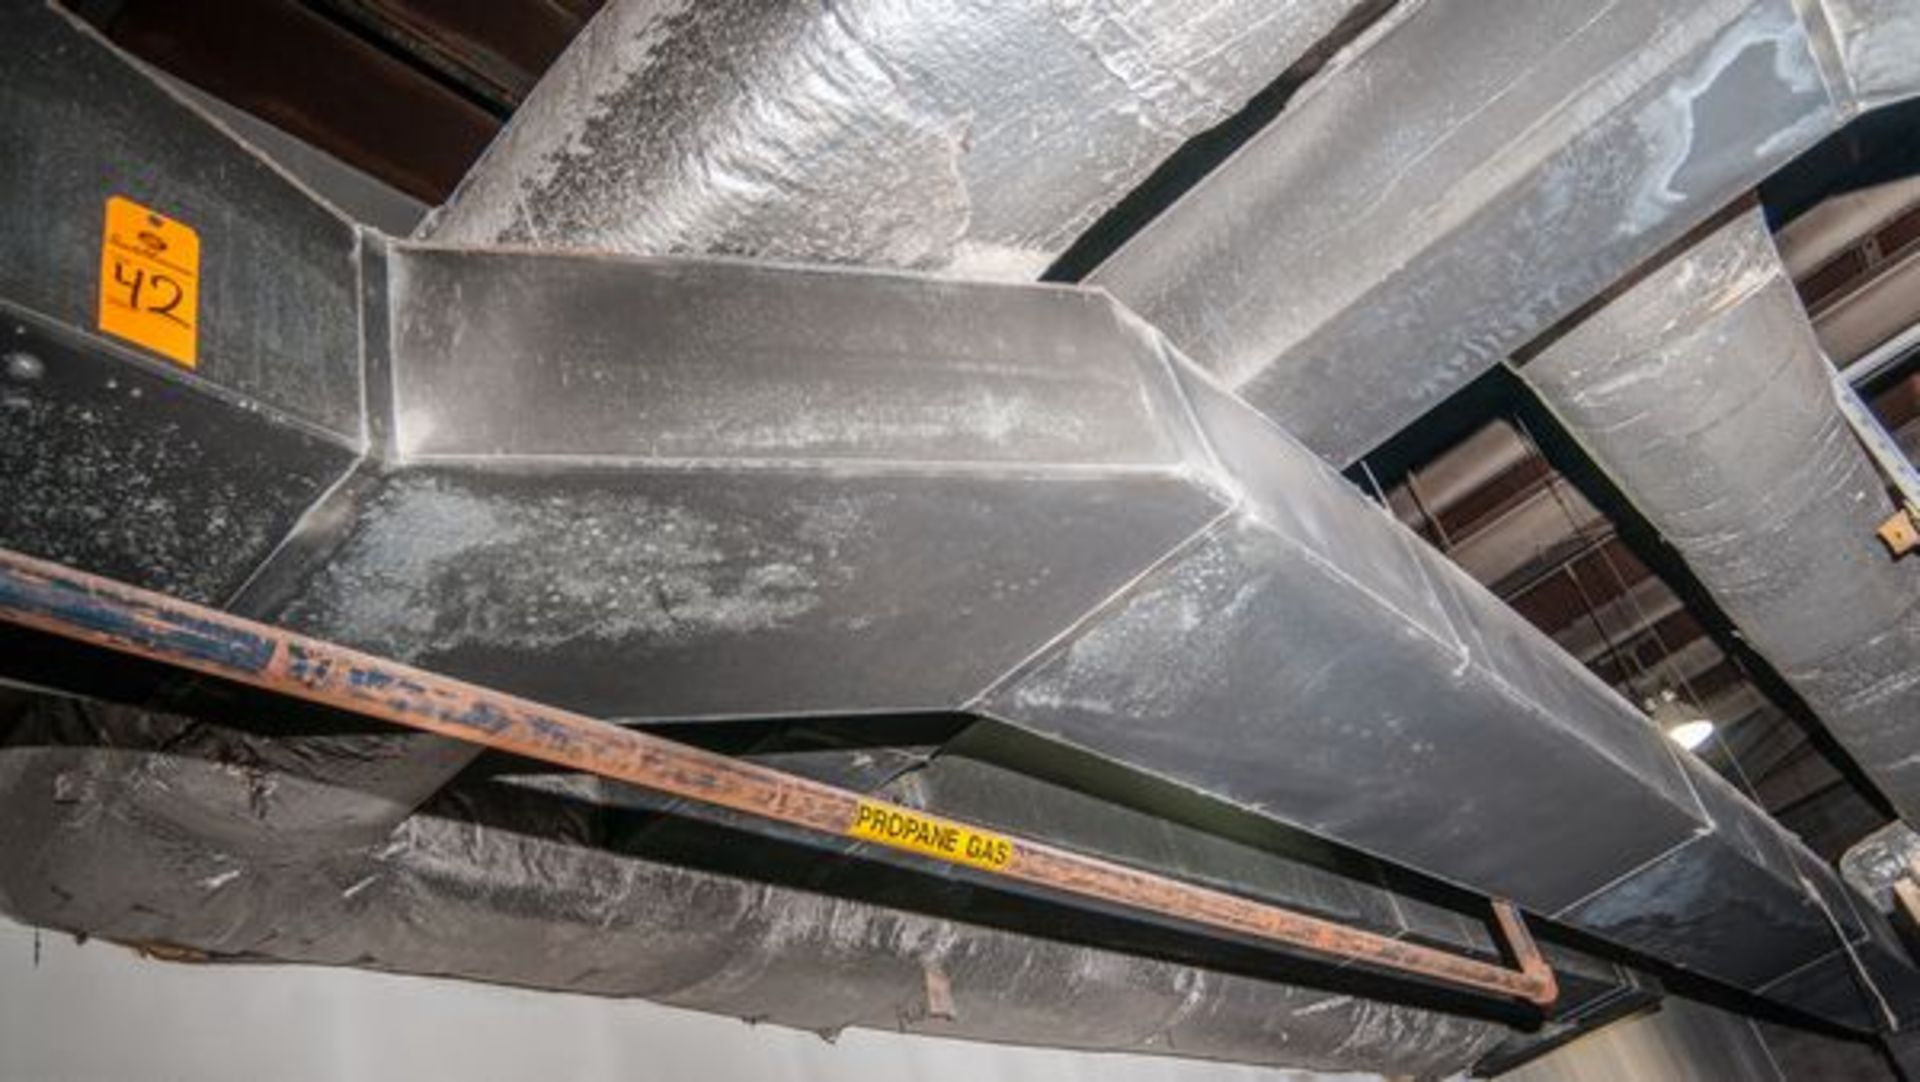 METAL DUCT MATERIAL & BLOWERS THROUGHOUT MAIN BUILDING EXCLUDING OFFICE AREAS